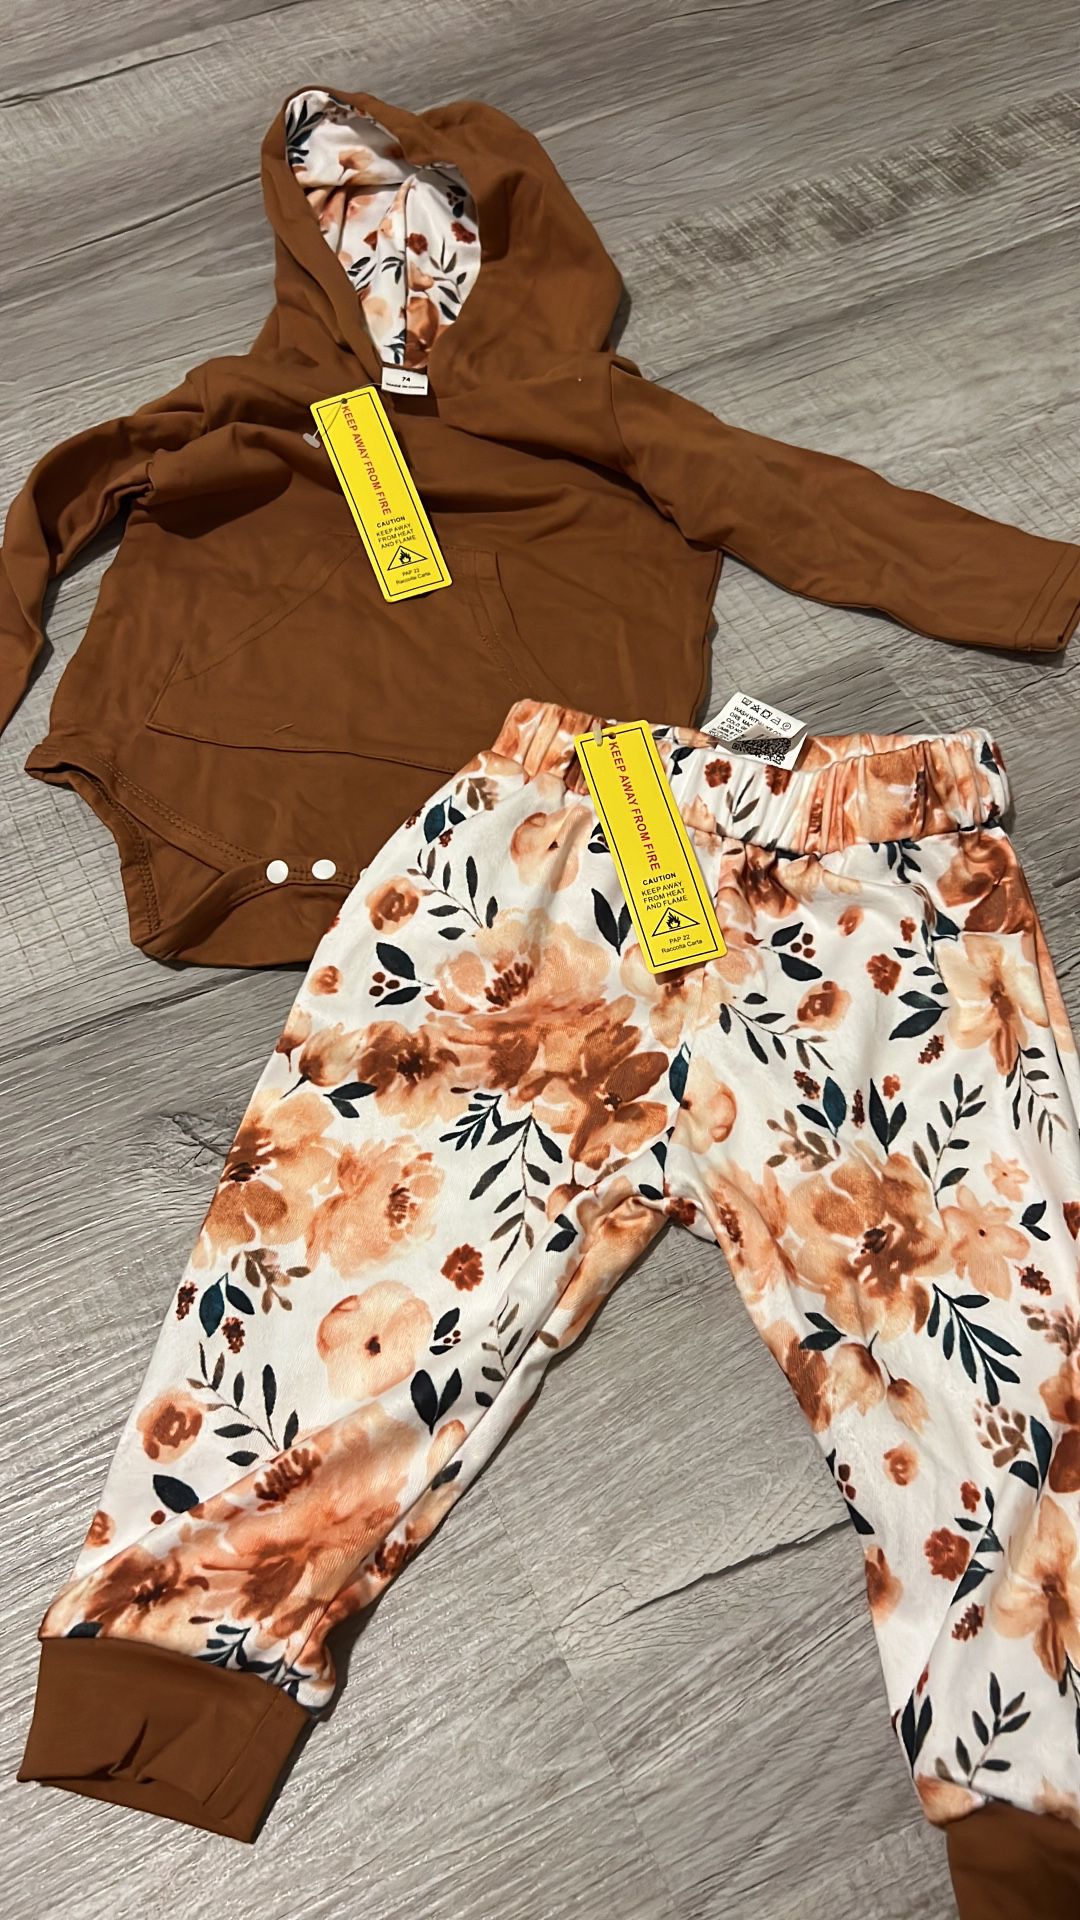 Baby Girl Fall Outfit Never Used